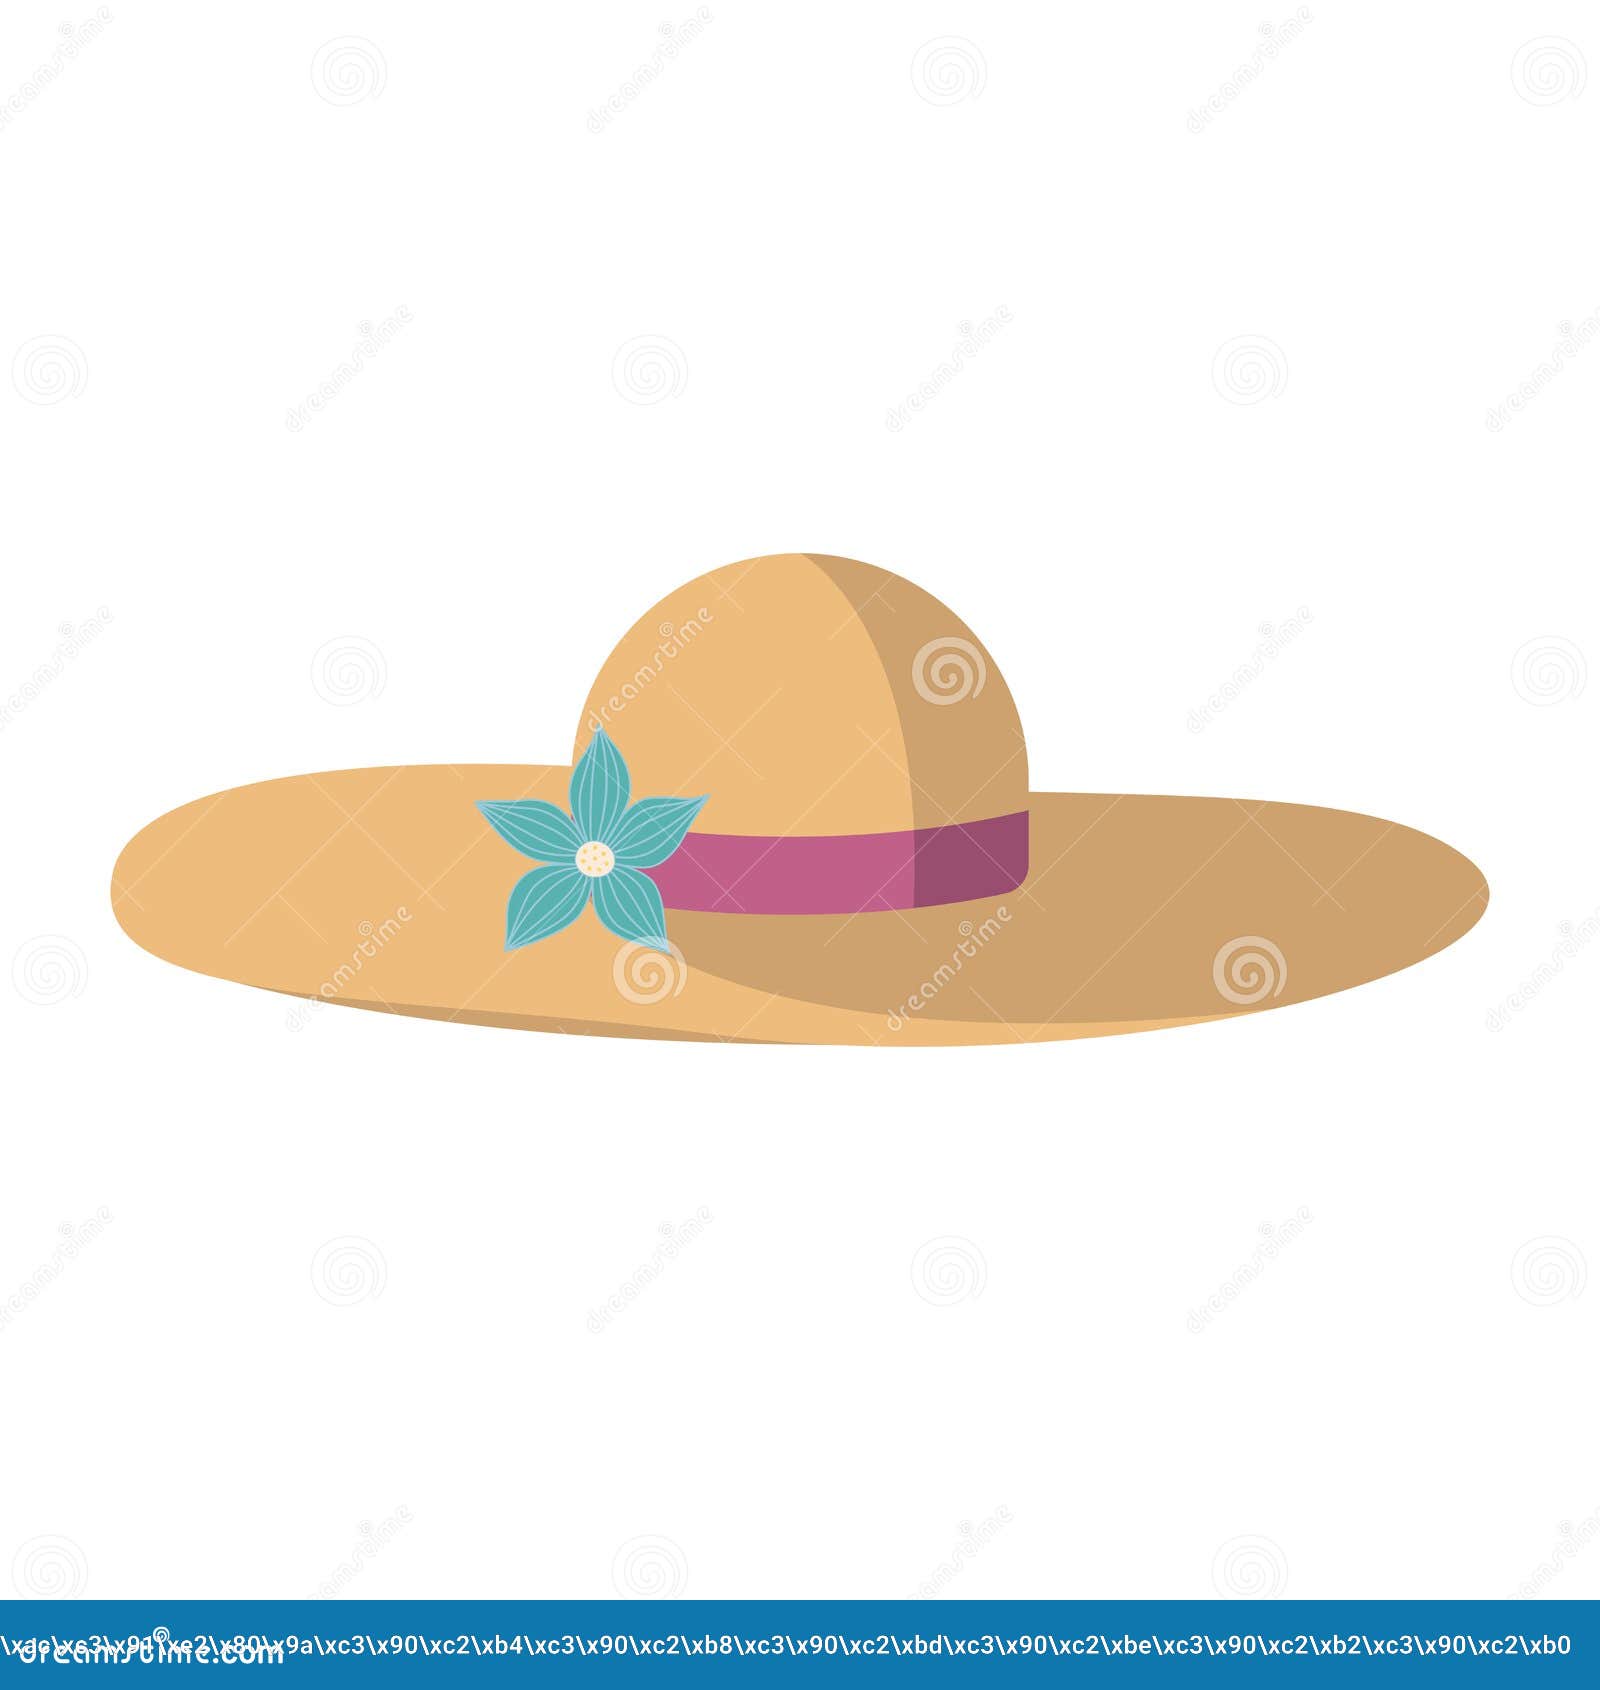 Straw hat with wide brims stock vector. Illustration of protection ...